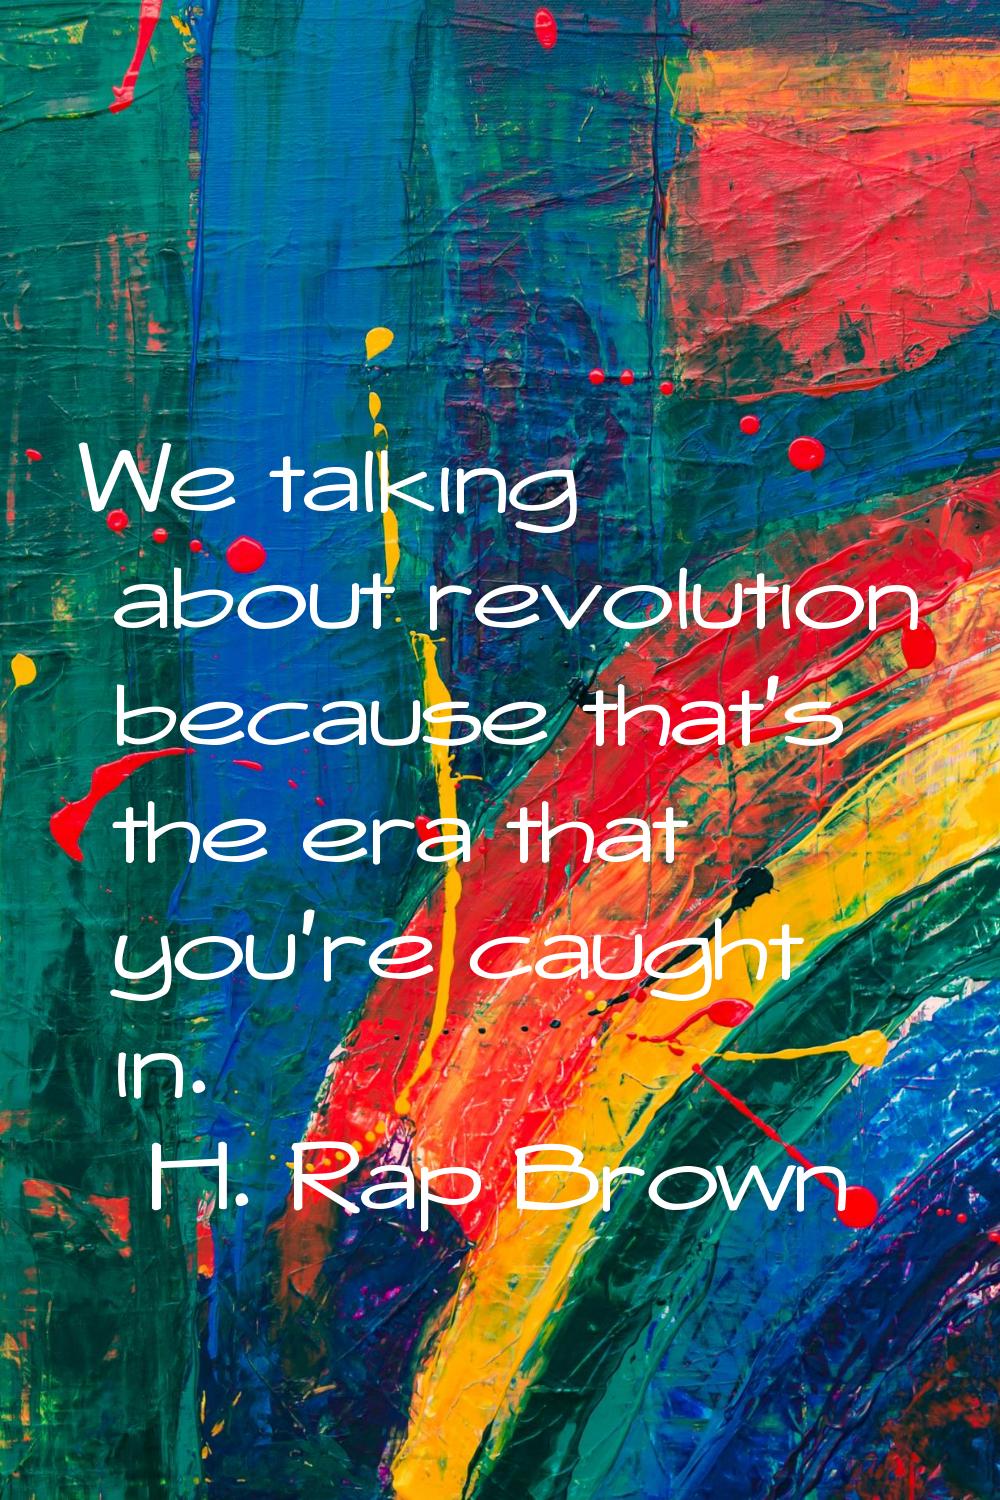 We talking about revolution because that's the era that you're caught in.